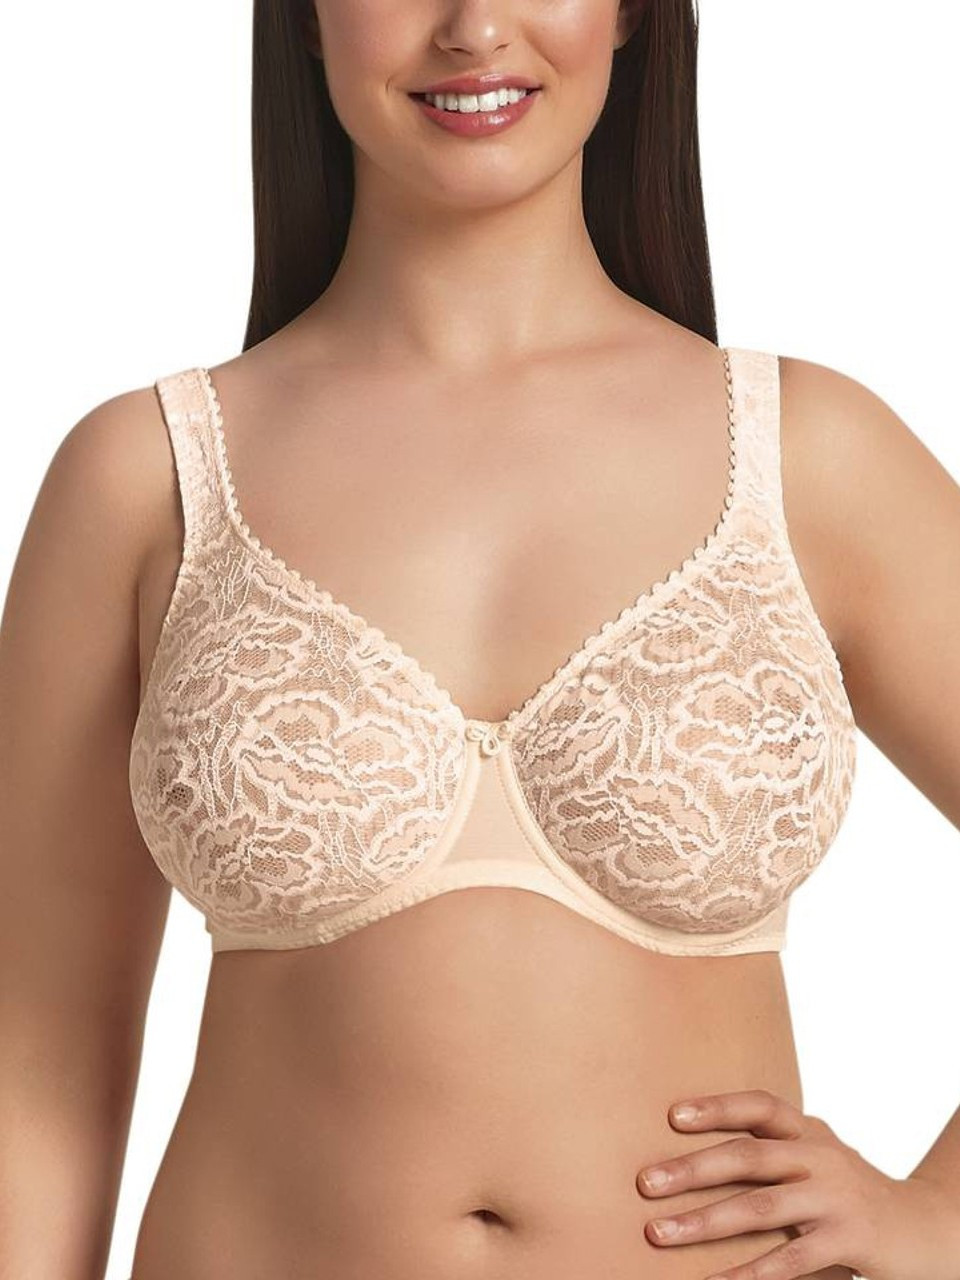 Bras 101: Cup Coverage Levels Explained by Wacoal - Wacoal